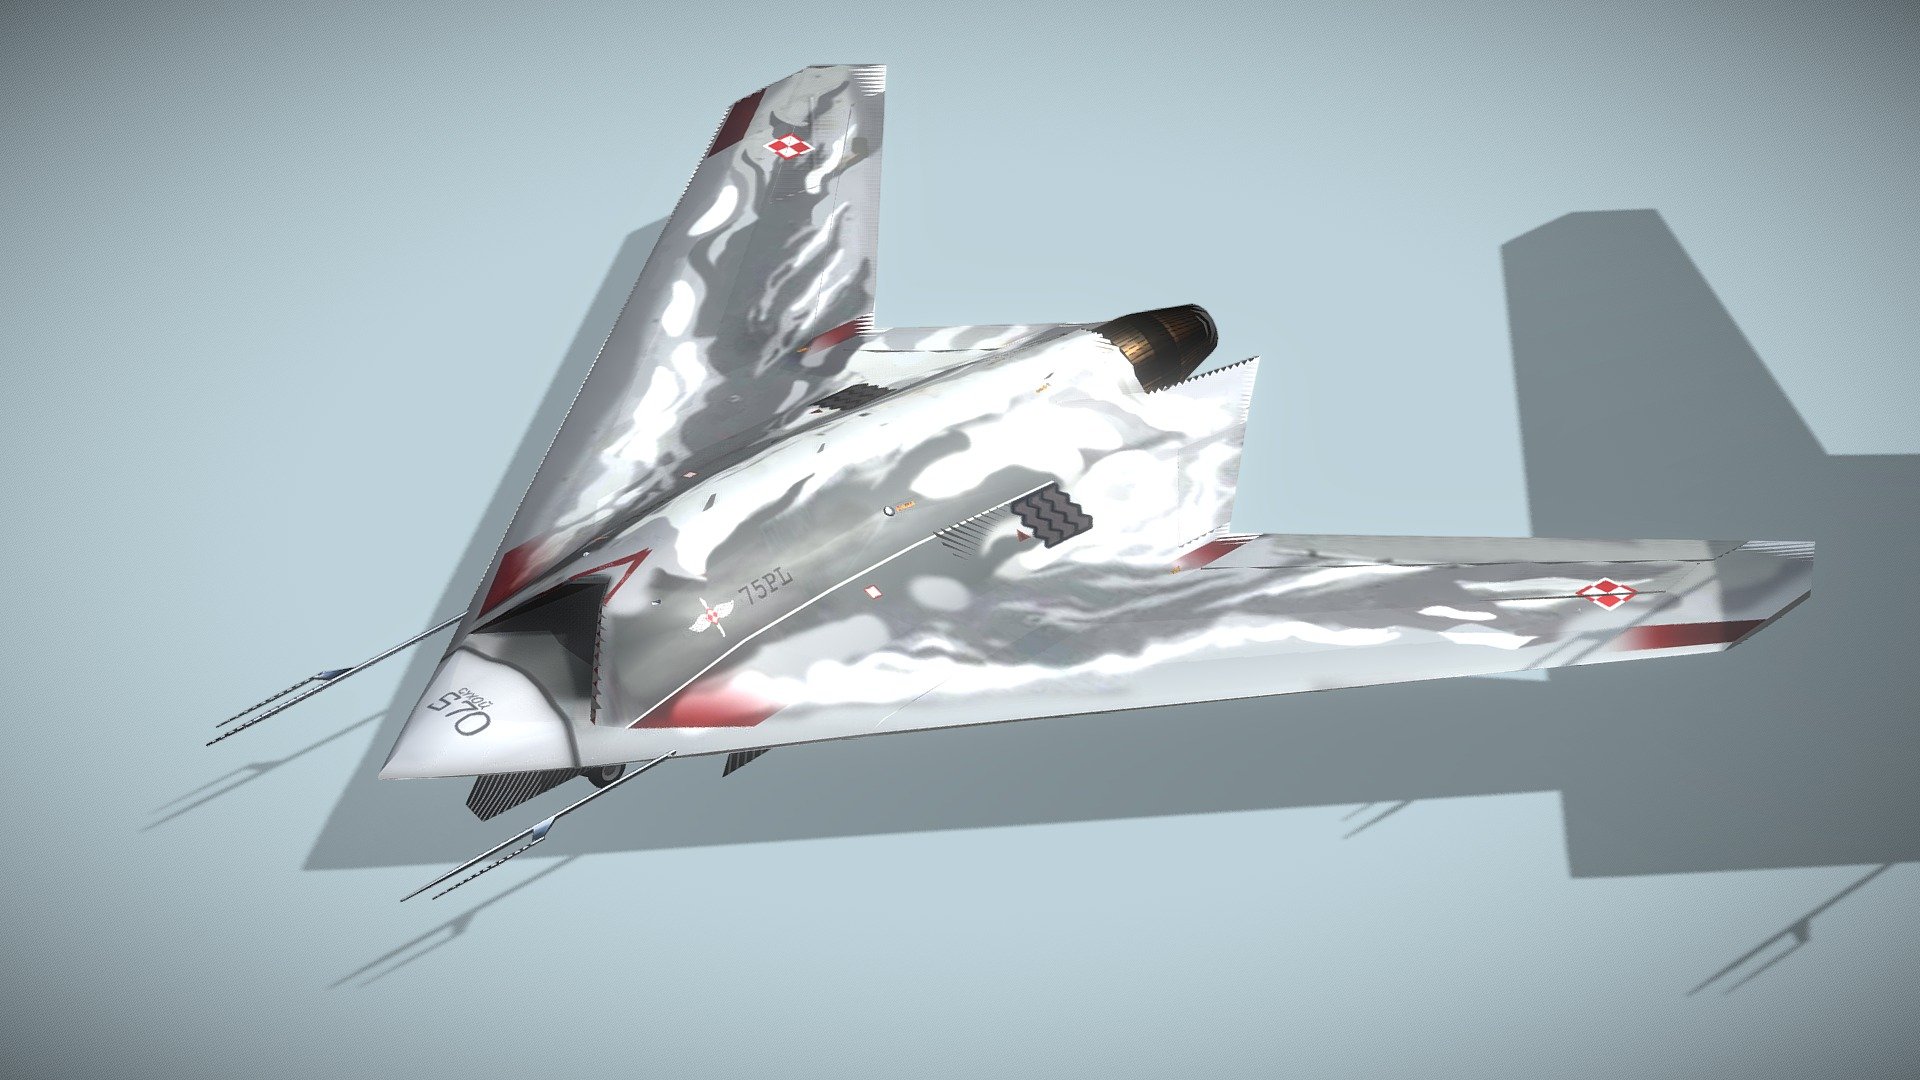 Sukhoi S-70 Okhotnik

Lowpoly model of russian UAV fighter/bomber



The Sukhoi S-70 Okhotnik-B, also referred to as Hunter-B, is a Russian stealth heavy unmanned combat aerial vehicle (UCAV) being developed by Sukhoi and Russian Aircraft Corporation MiG as a sixth-generation aircraft project. The drone is based on the earlier Mikoyan Skat, designed by MiG, and encompassing some technologies of the fifth-generation Sukhoi Su-57 fighter jet. In the future, it is planned to act under the control of pilots of Su-57 jets.
The Okhotnik's design is based on the flying-wing scheme and incorporates use of composite materials and stealth coatings, making the drone low-observable in flight. It has a weight of about 20 tons and a wingspan around 20 m. 



Fully rigged

Model has bump, roughness map and 2 x diffuse textures.

Incl. 3D print STL file



Check also my other aircrafts and cars.

Patreon with monthly free model - Sukhoi S-70 Okhotnik - Buy Royalty Free 3D model by NETRUNNER_pl 3d model